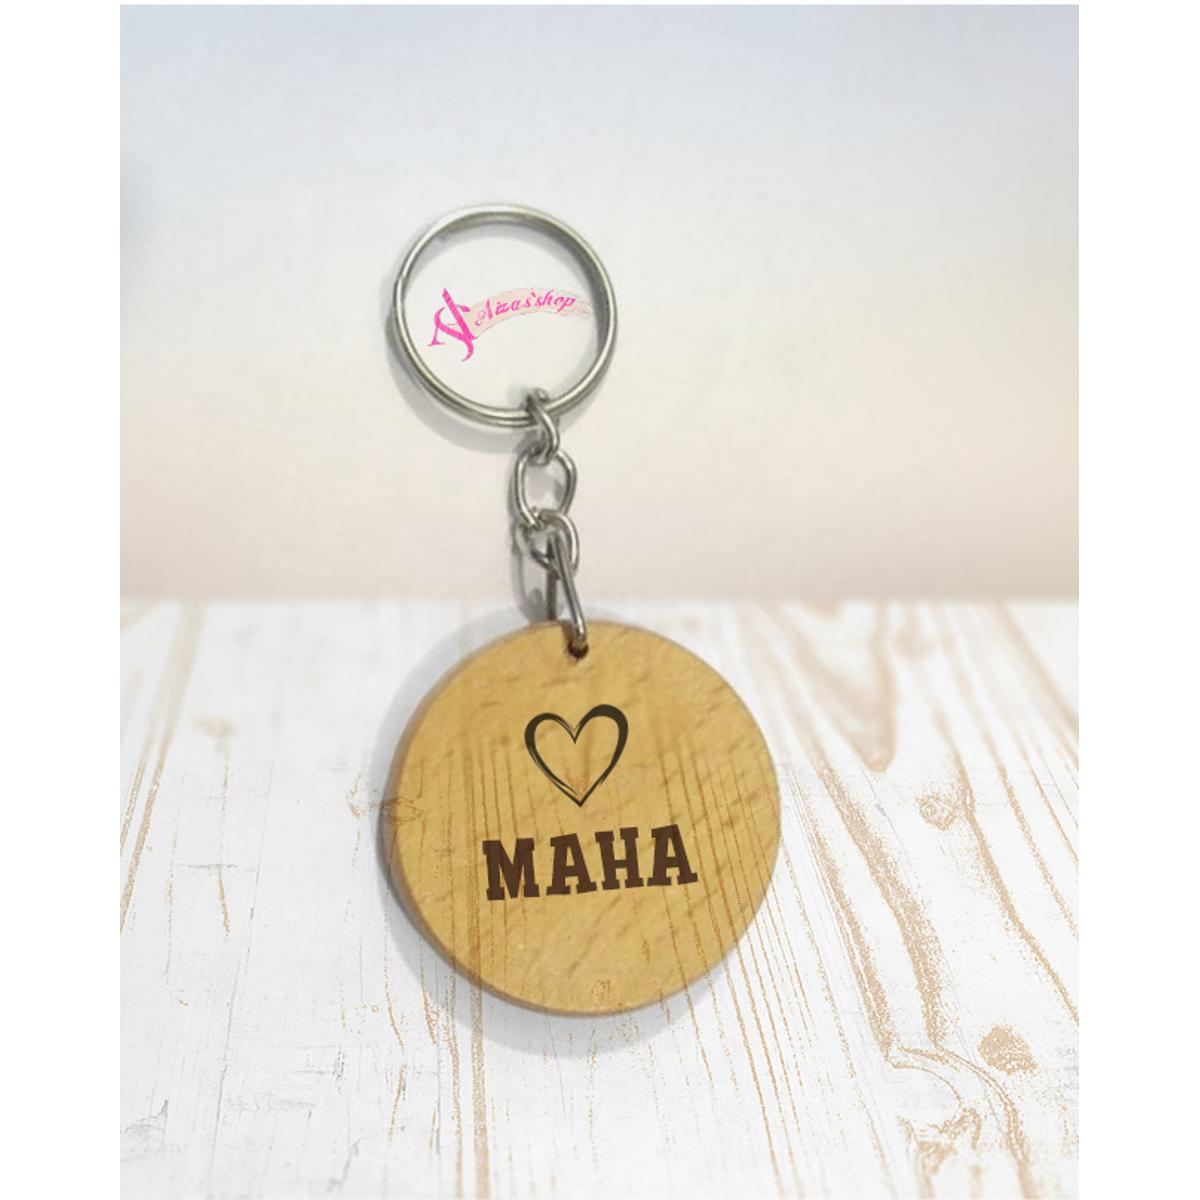 Maha name keychain: Buy Online at Best Prices in Pakistan | Daraz.pk